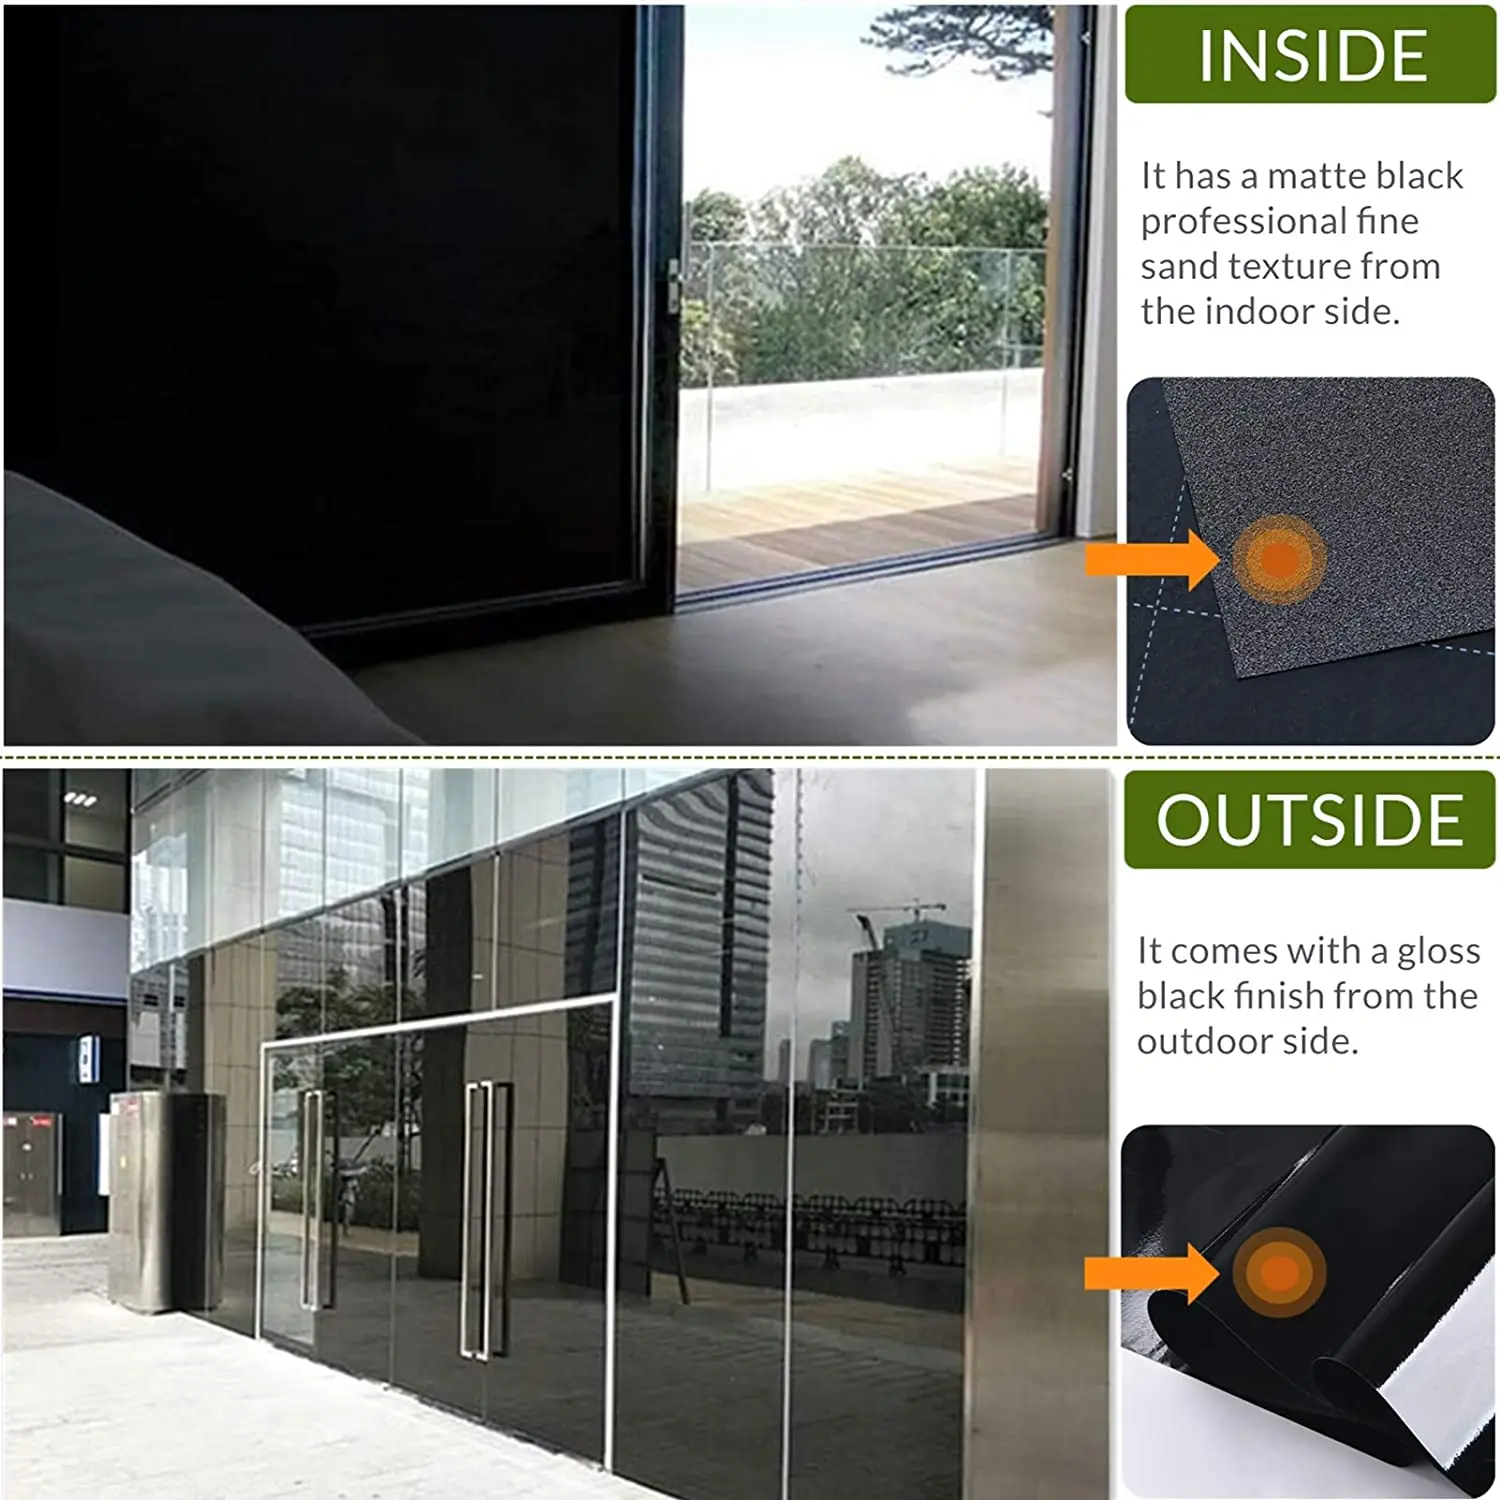 Static Cling Total Blackout Window Film Privacy Room Darkening Tint Black Cover 